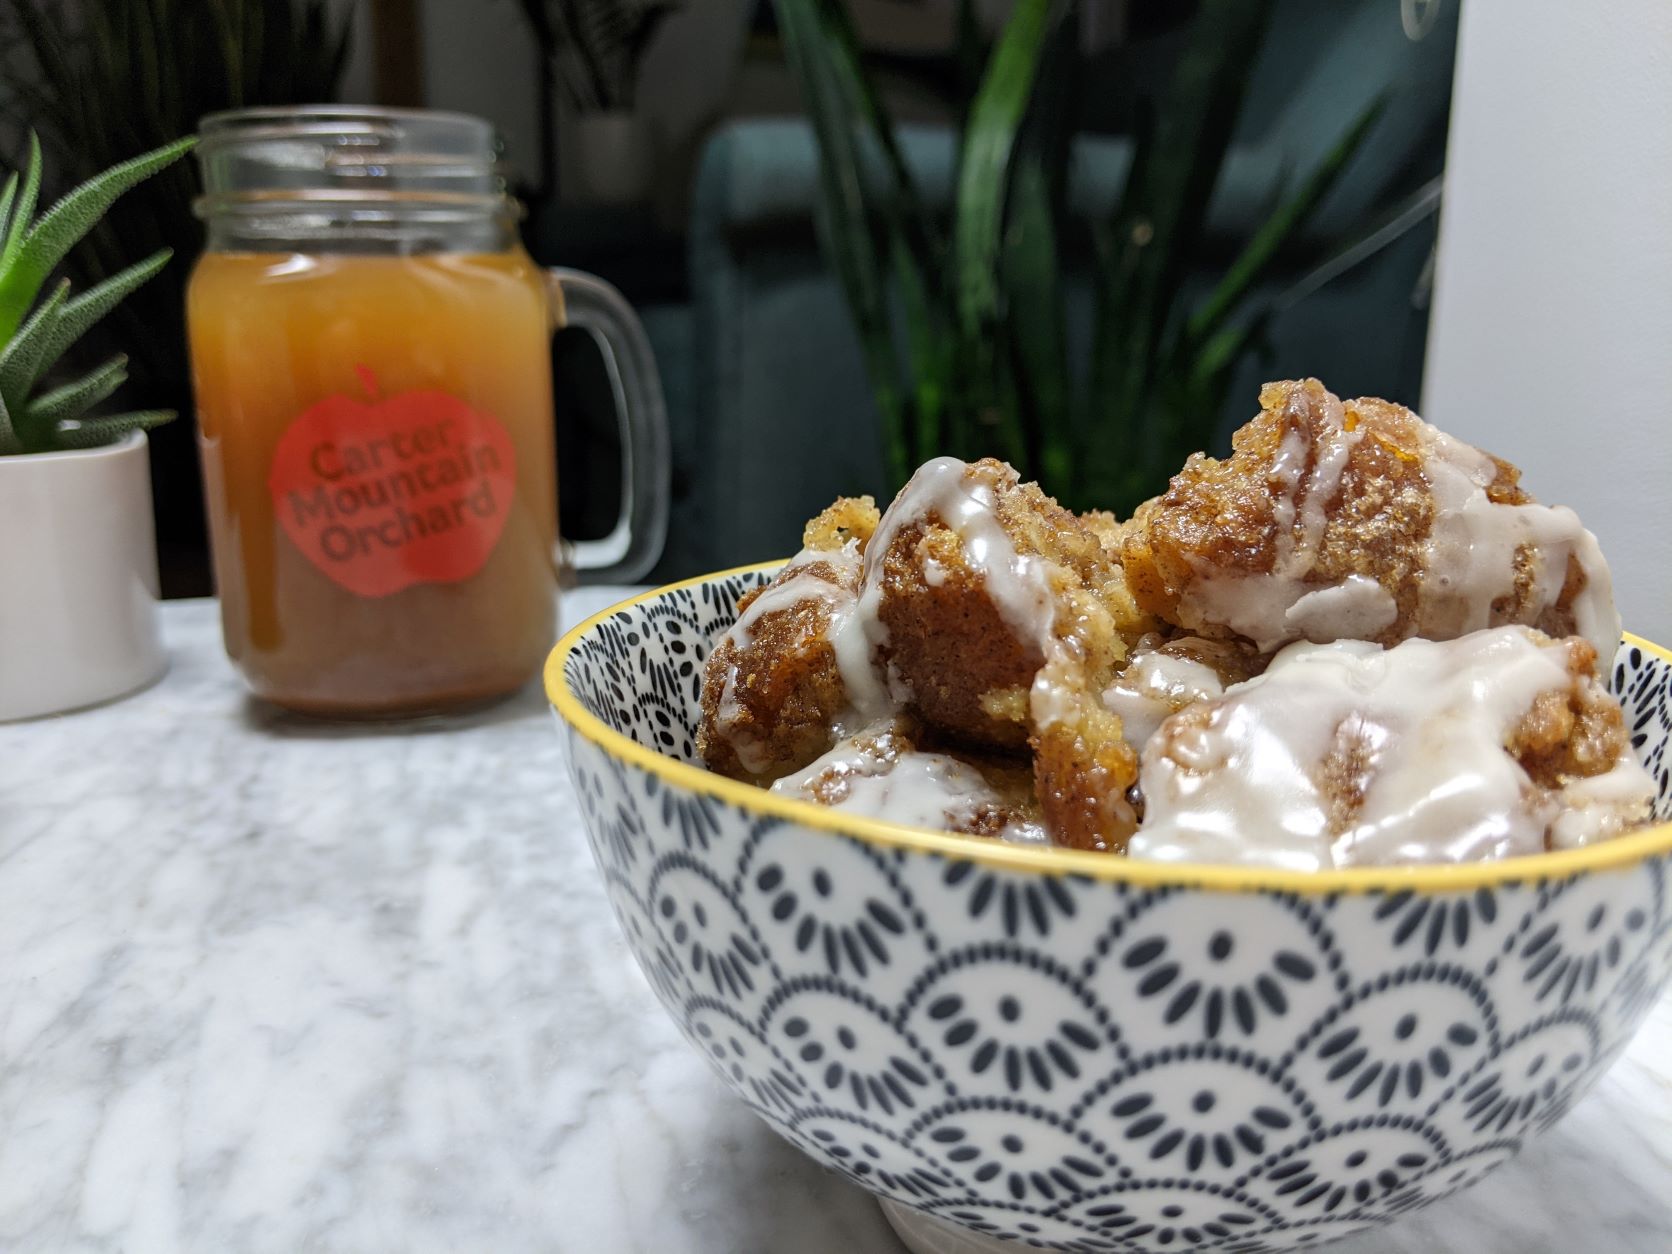 Carter Mountain's homemade cider donut bread pudding